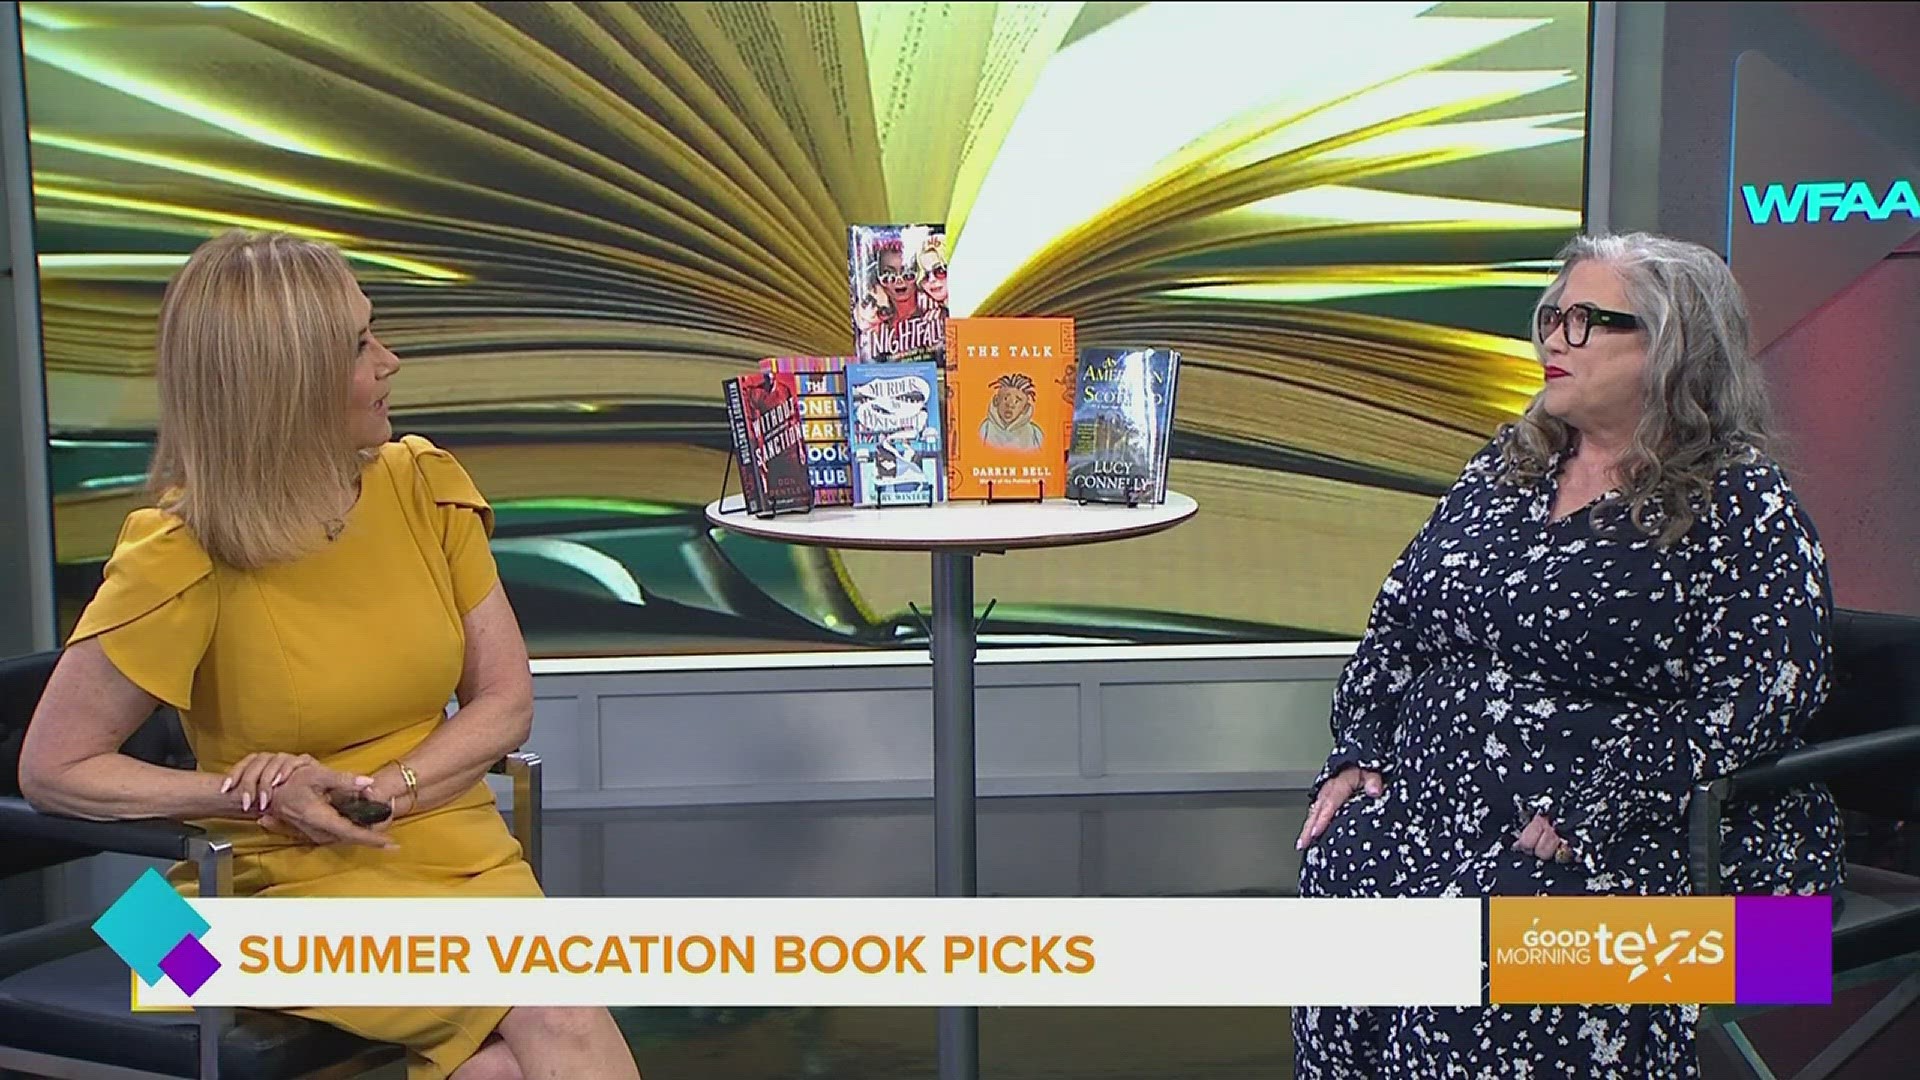 Entertainment critic and author Candace Havens gives us her top five beach reads for the summer.